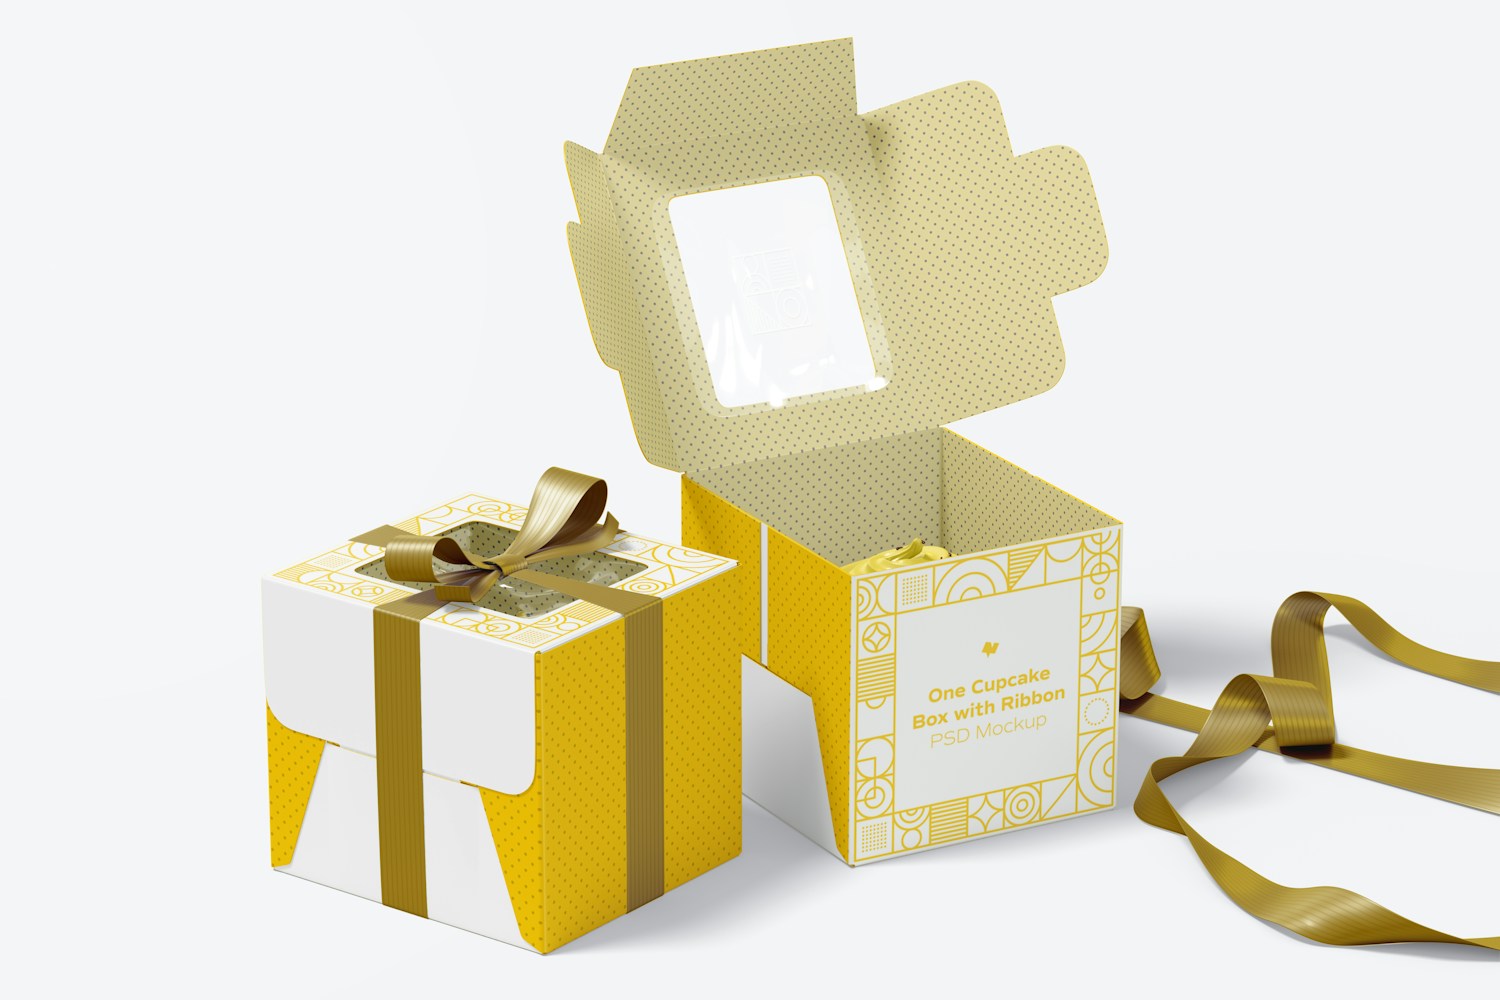 One Cupcake Box with Ribbon Mockup, Opened and Closed